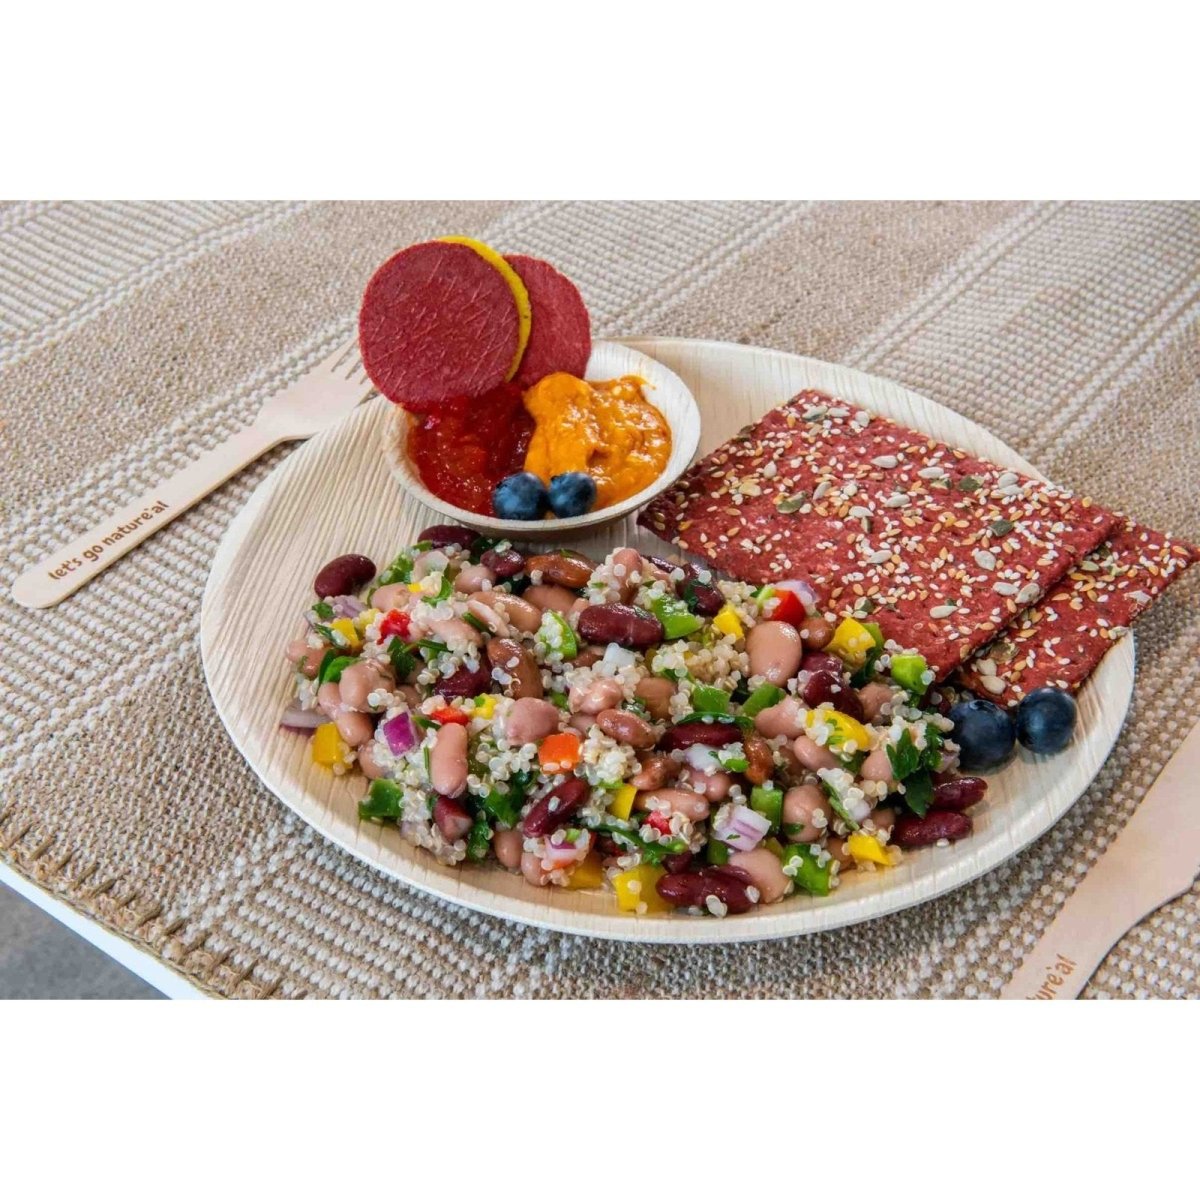 Round eco friendly party plate with salad